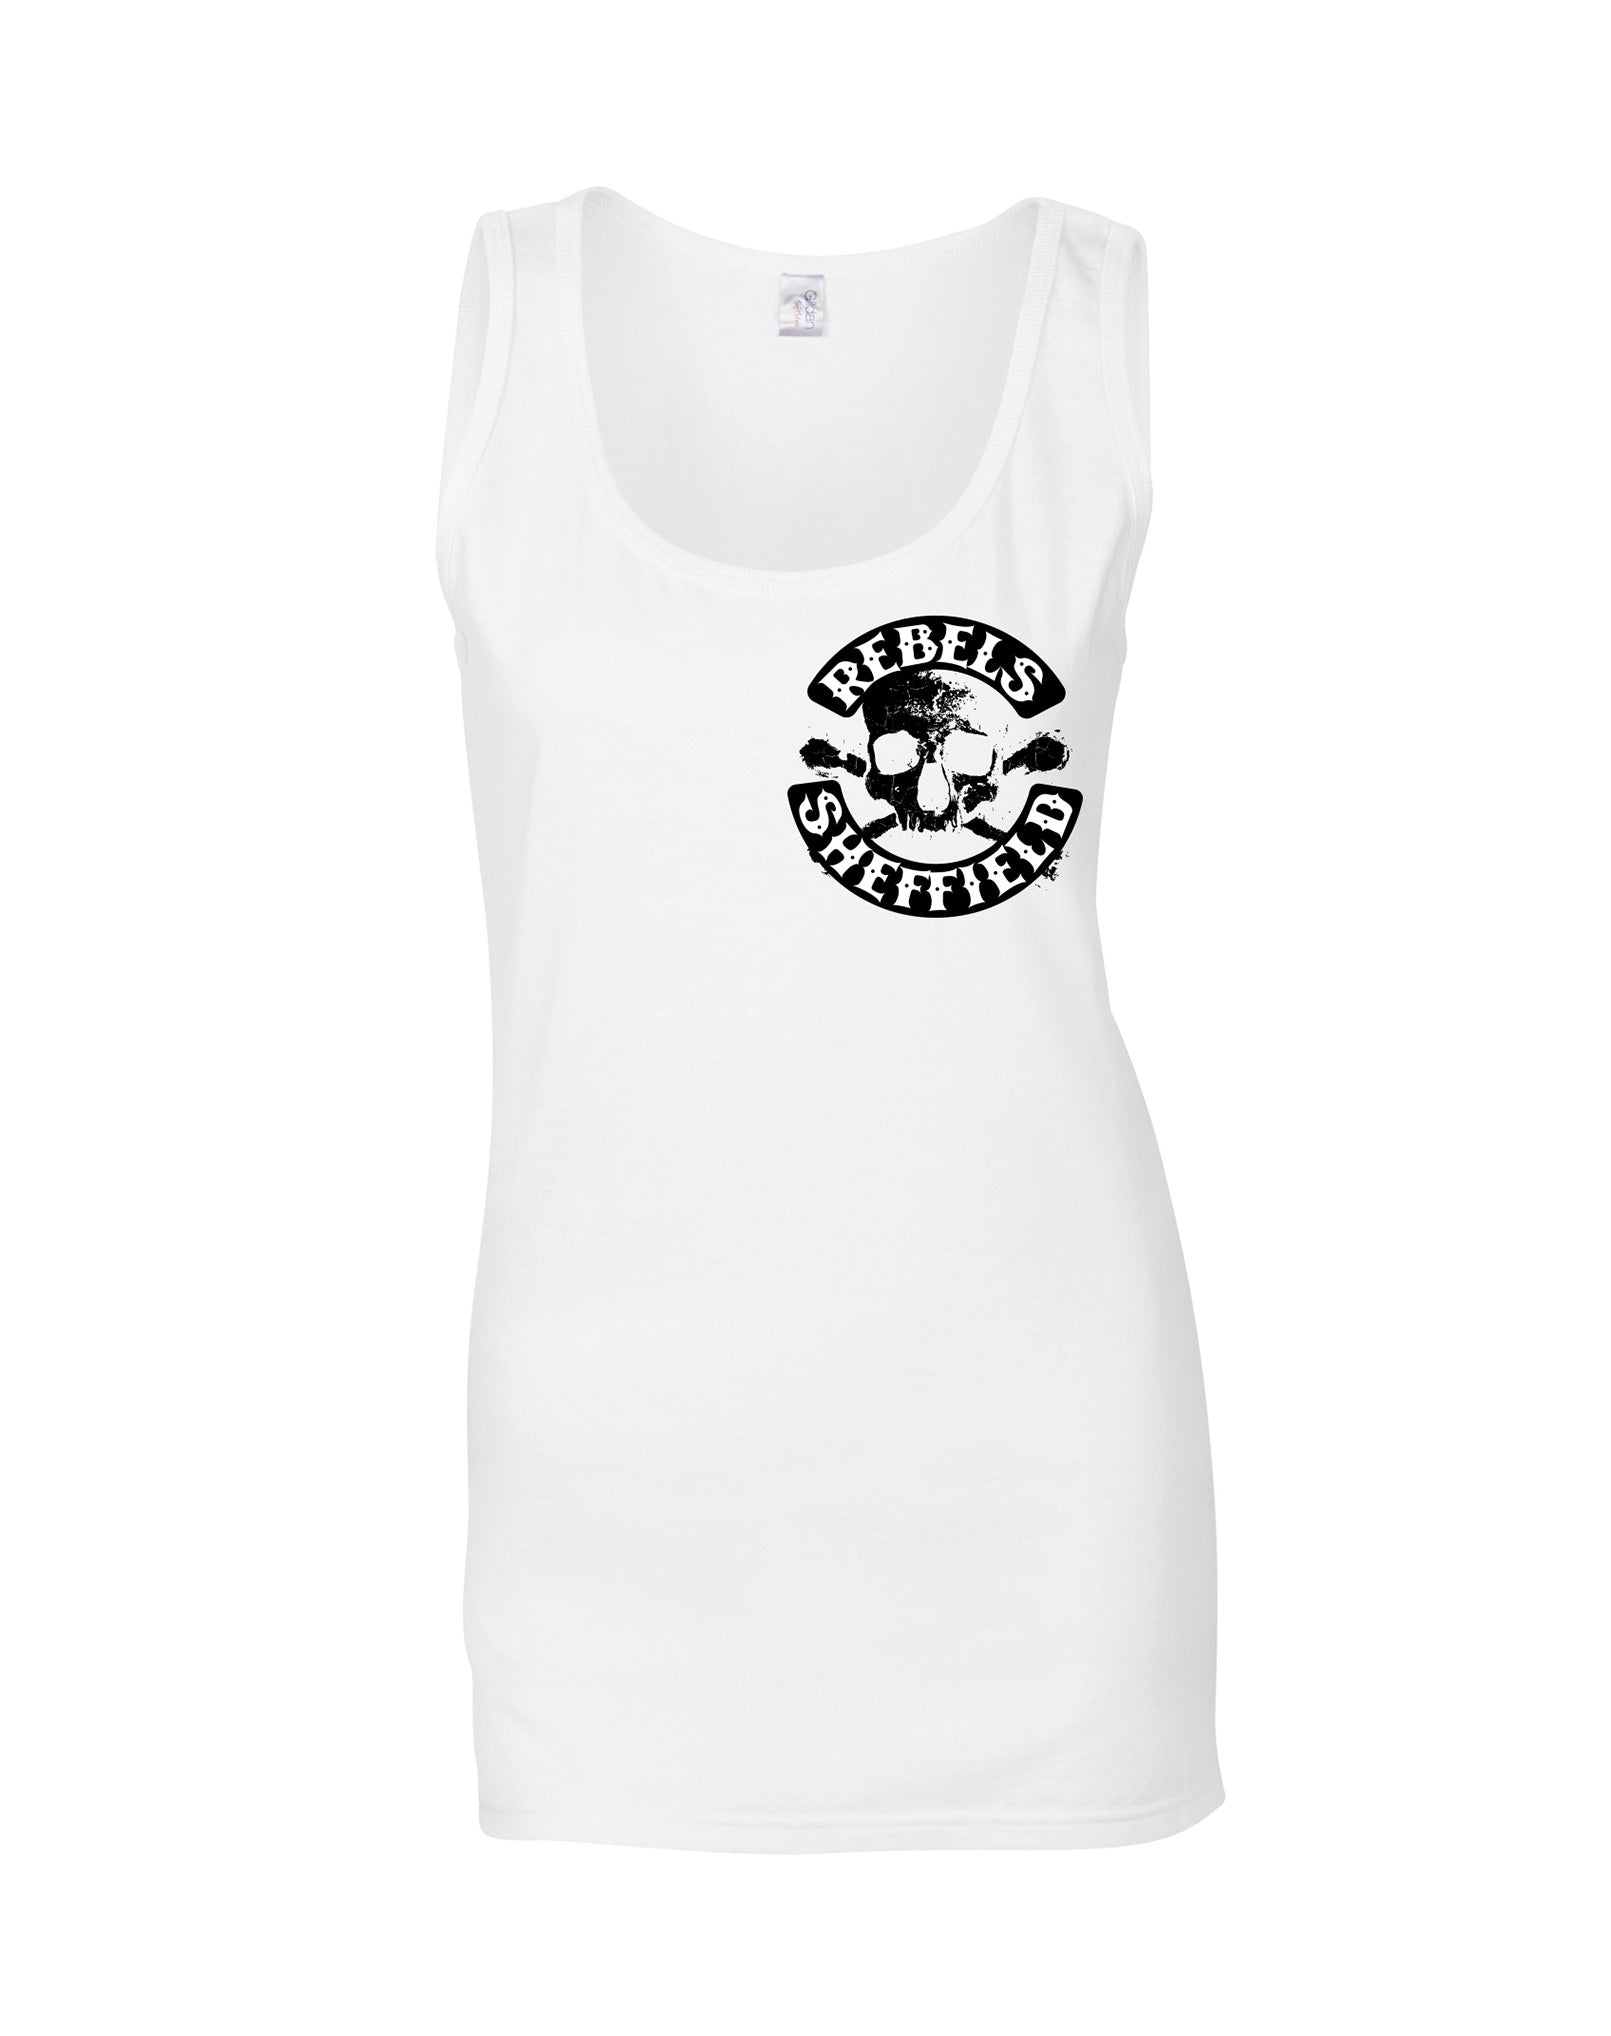 Rebels small skull crossbones ladies fit vest - various colours - Dirty Stop Outs